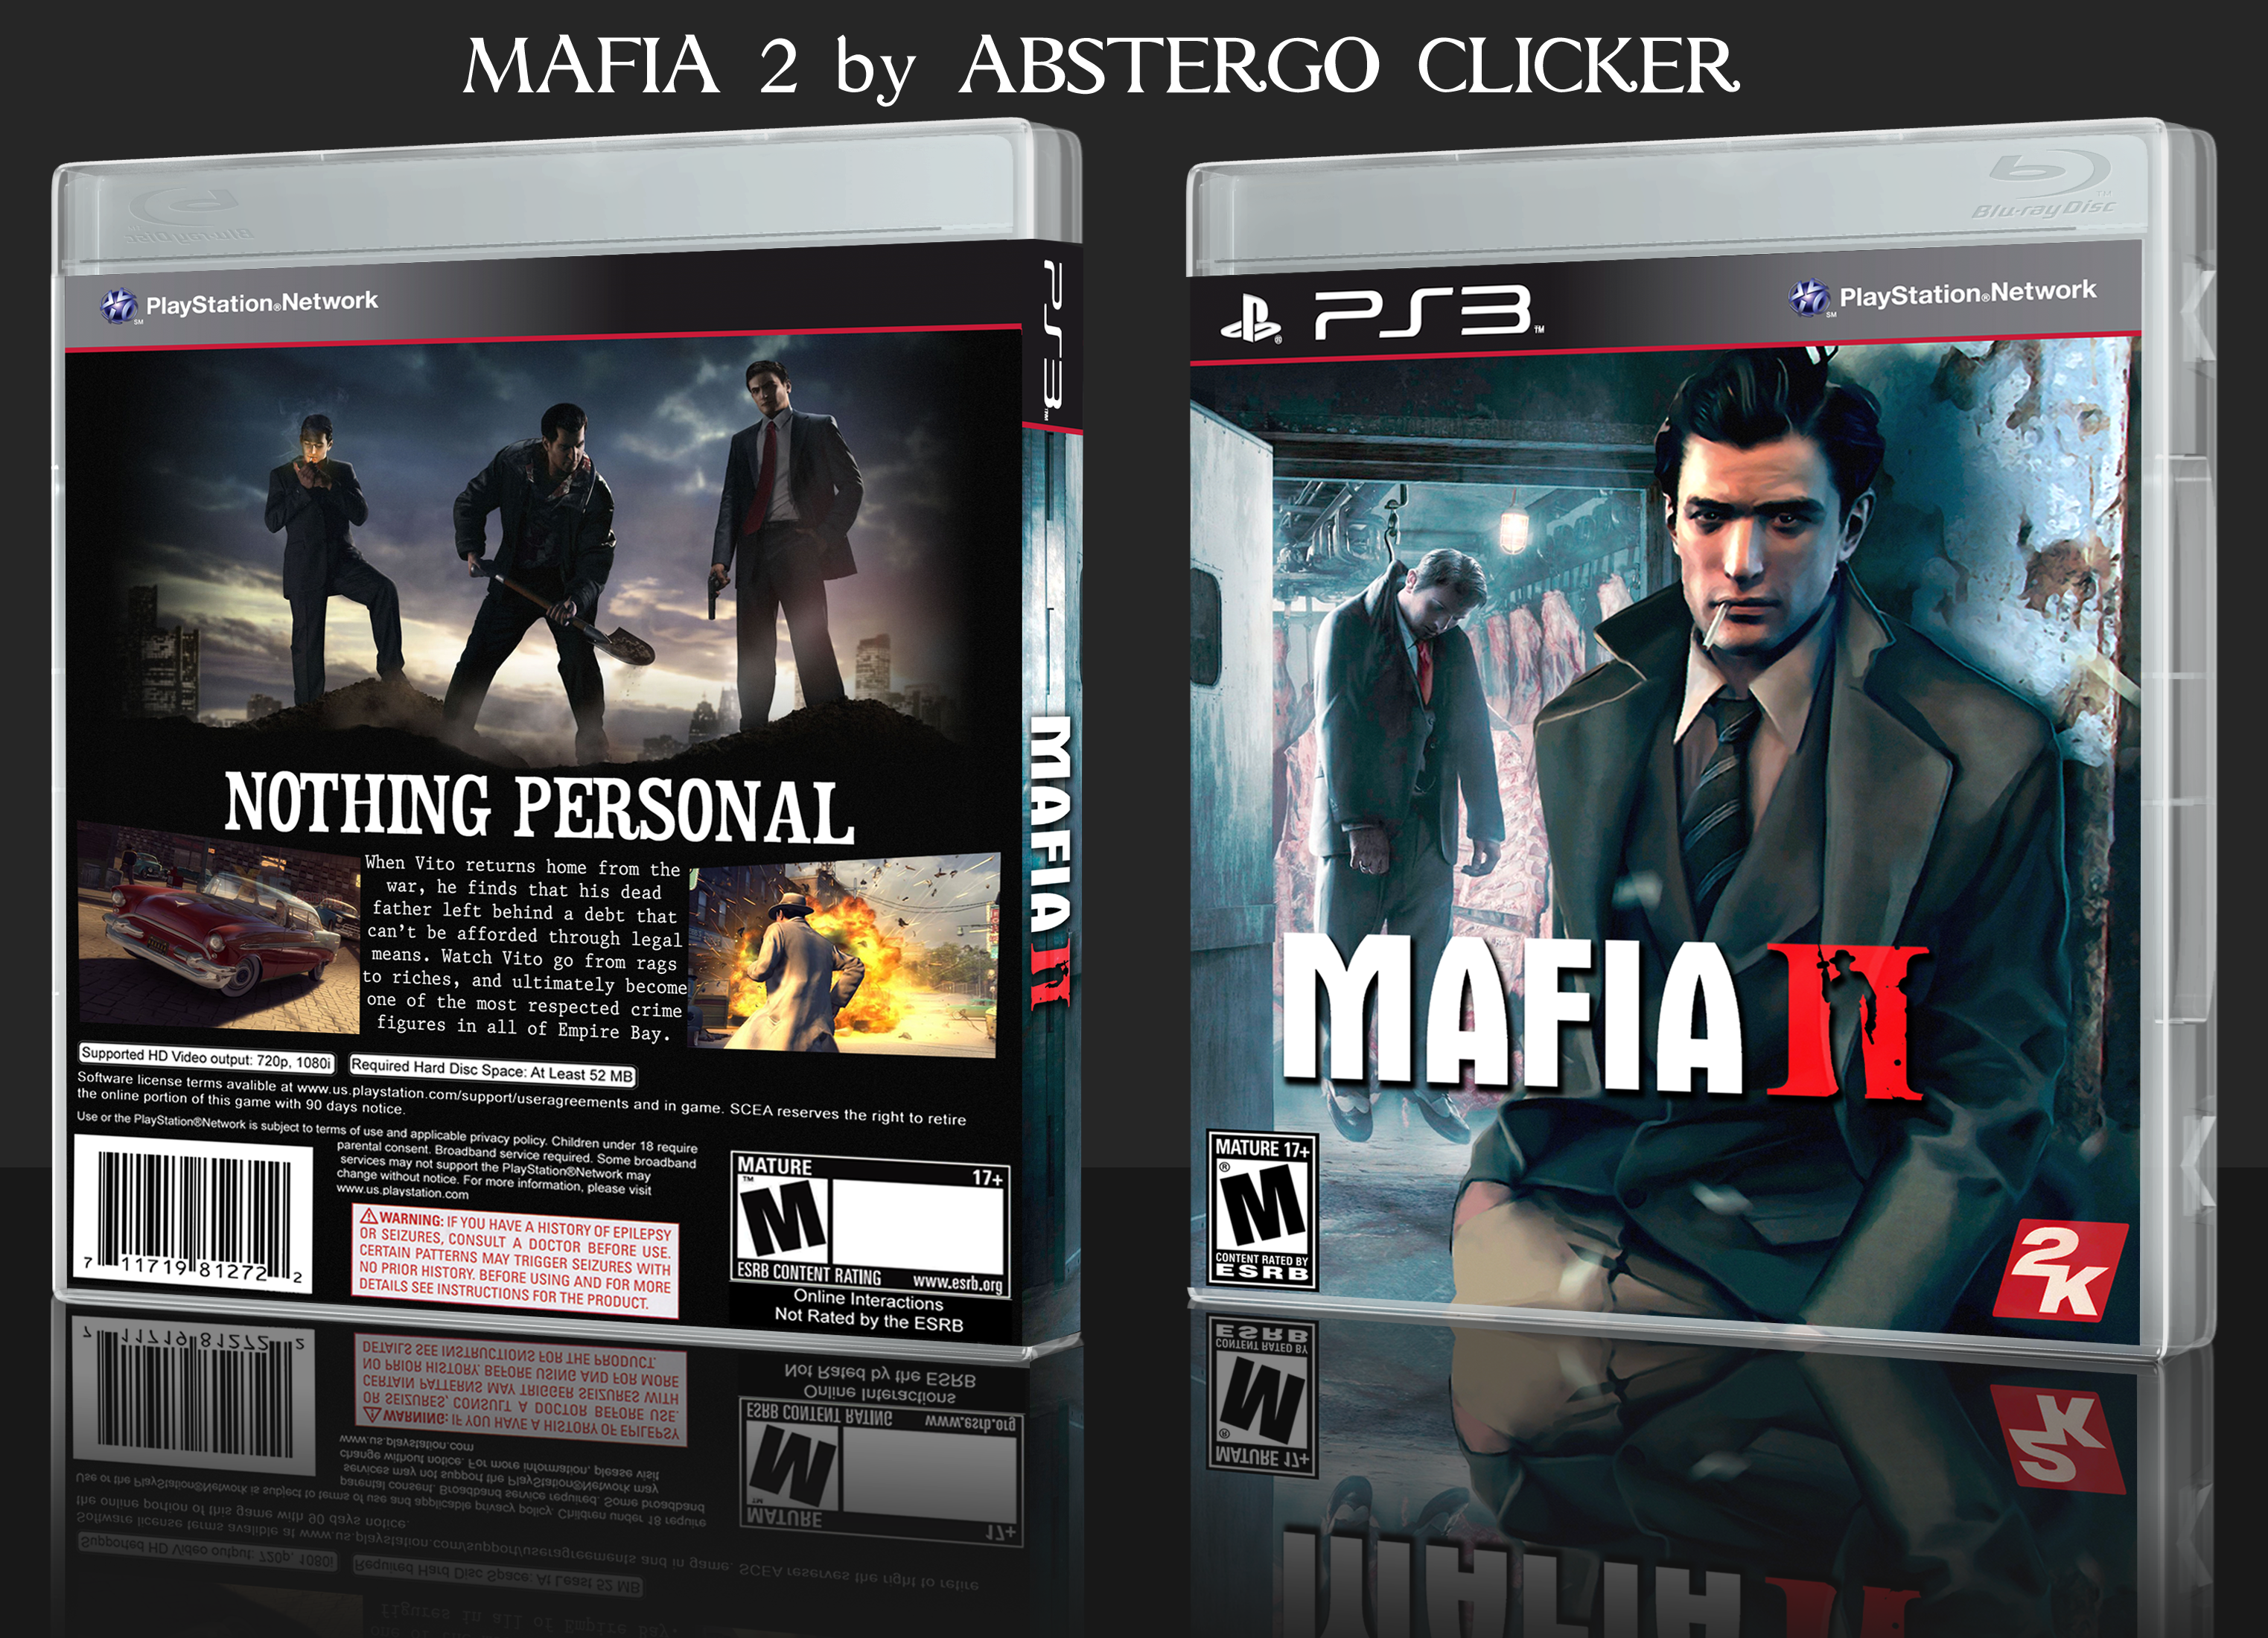 MAFIA II 2 PS3 SONY PLAYSTATION 3 COMPLETE MAP MANUAL 2K GAMES